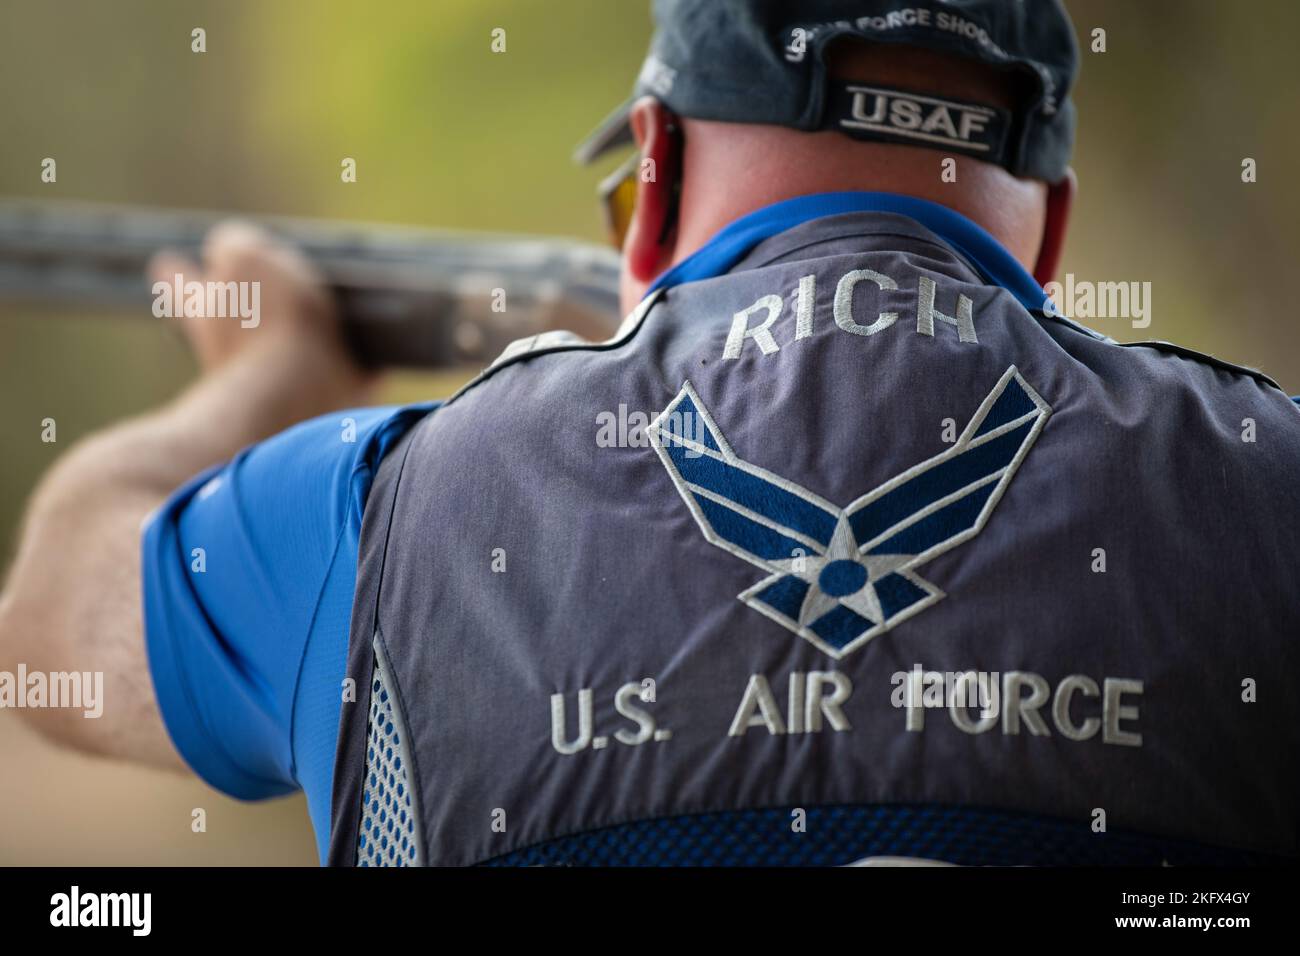 U.S. Air Force Major Daniel Rich, Air Force Services Center, aims his rifle during trapshooting practice October 12, 2022, at the San Antonio Gun Club, Texas. Rich is a member of the Air Force World Class Athlete Program that’s designed to allow elite athletes the opportunity to train and compete in national events to make the U.S. Olympic Team. For the time the athletes are in the program, their sole focus is to train and stay ready to compete in the respective sport. Stock Photo